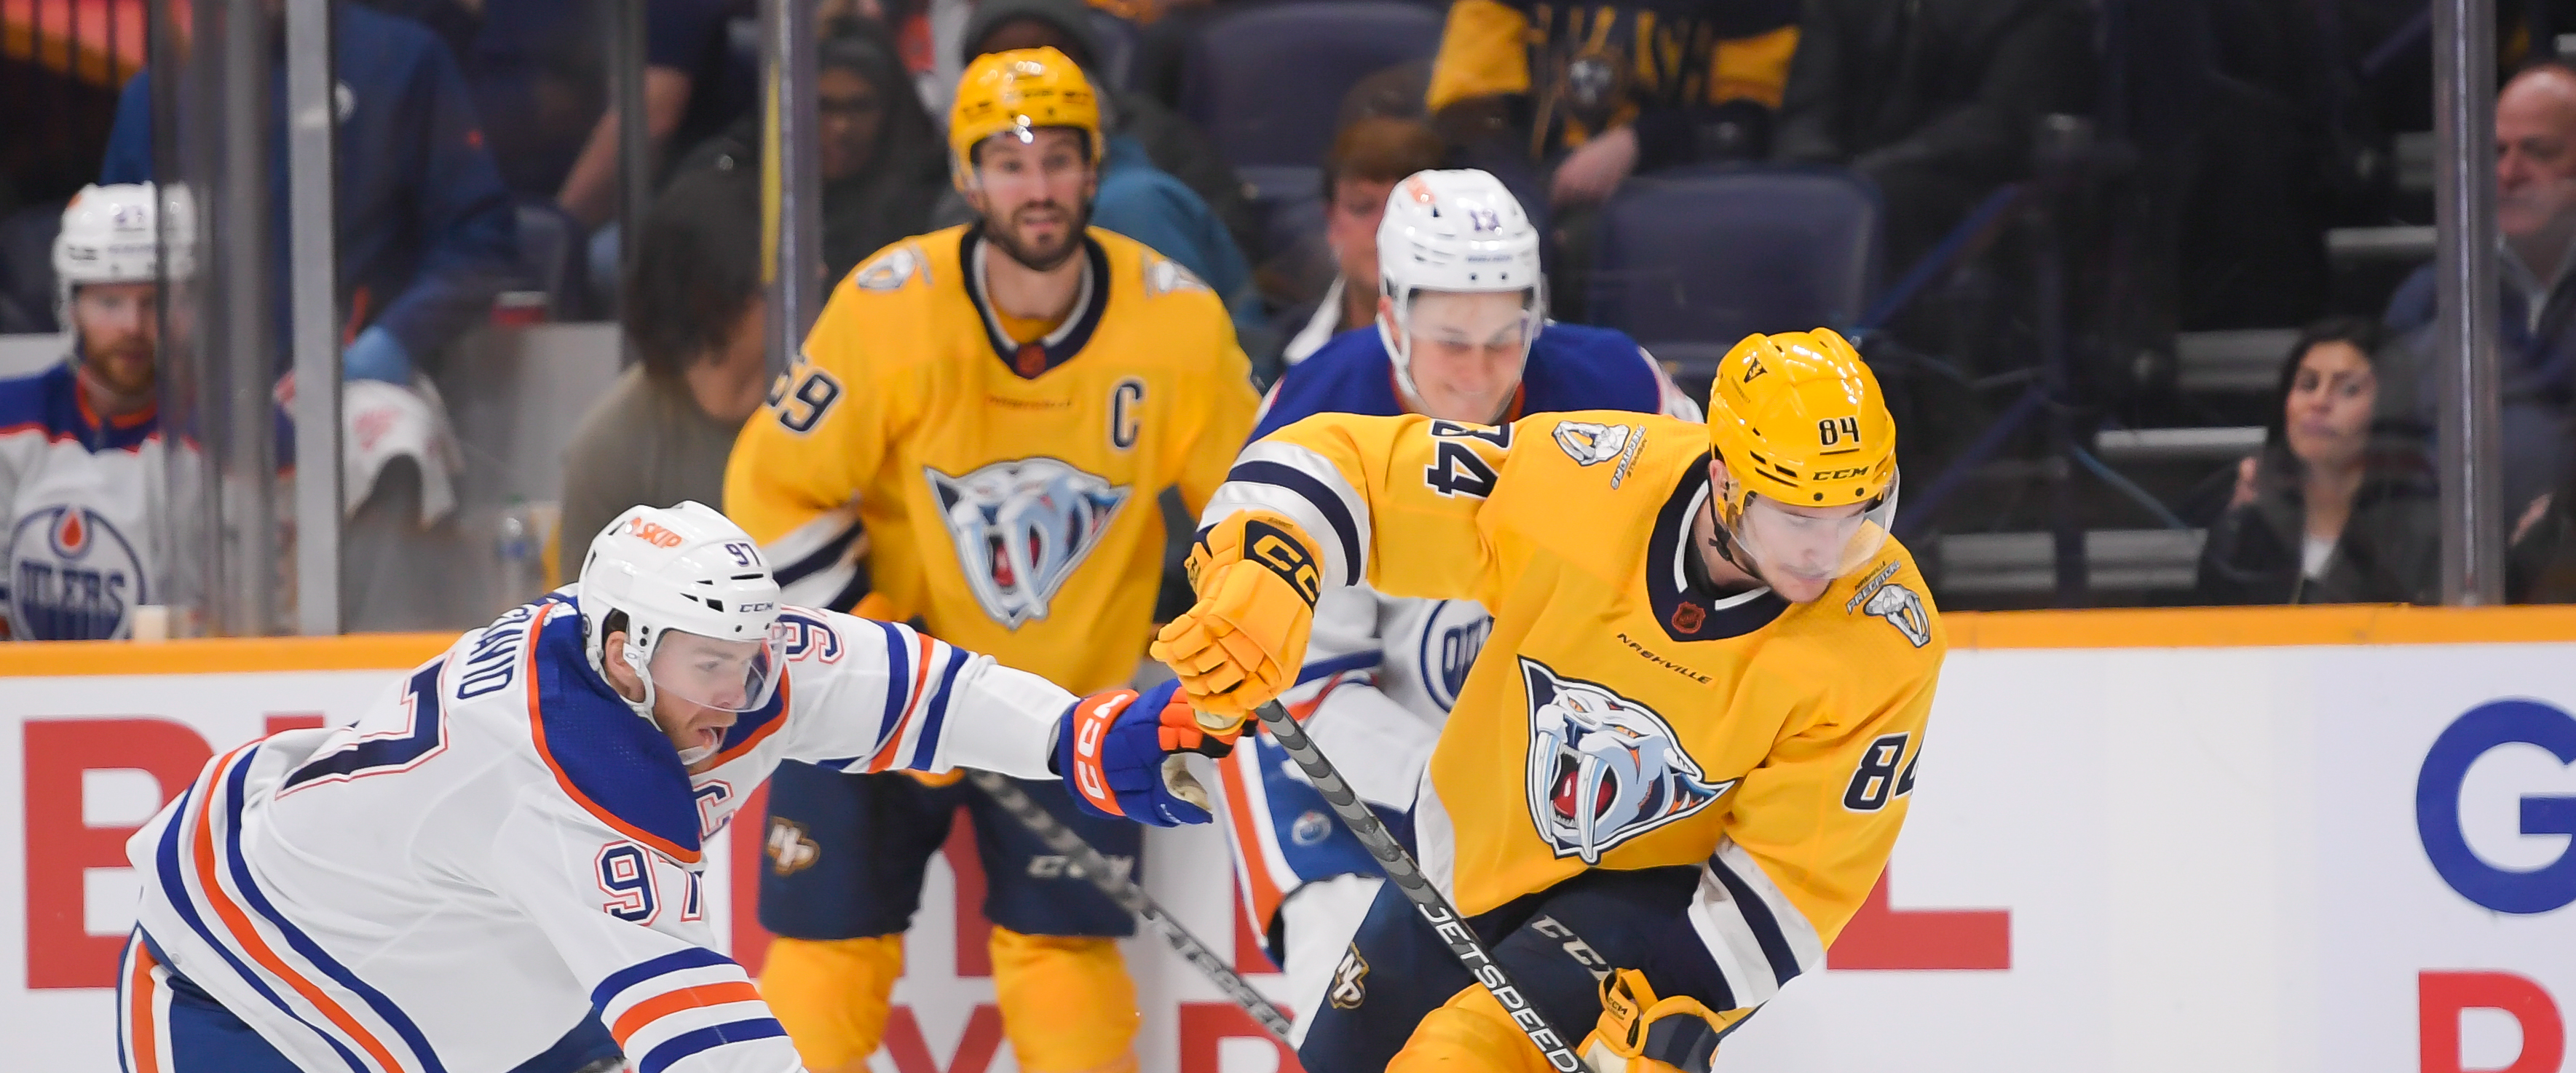 3 Predators players that are drastically underperforming this season